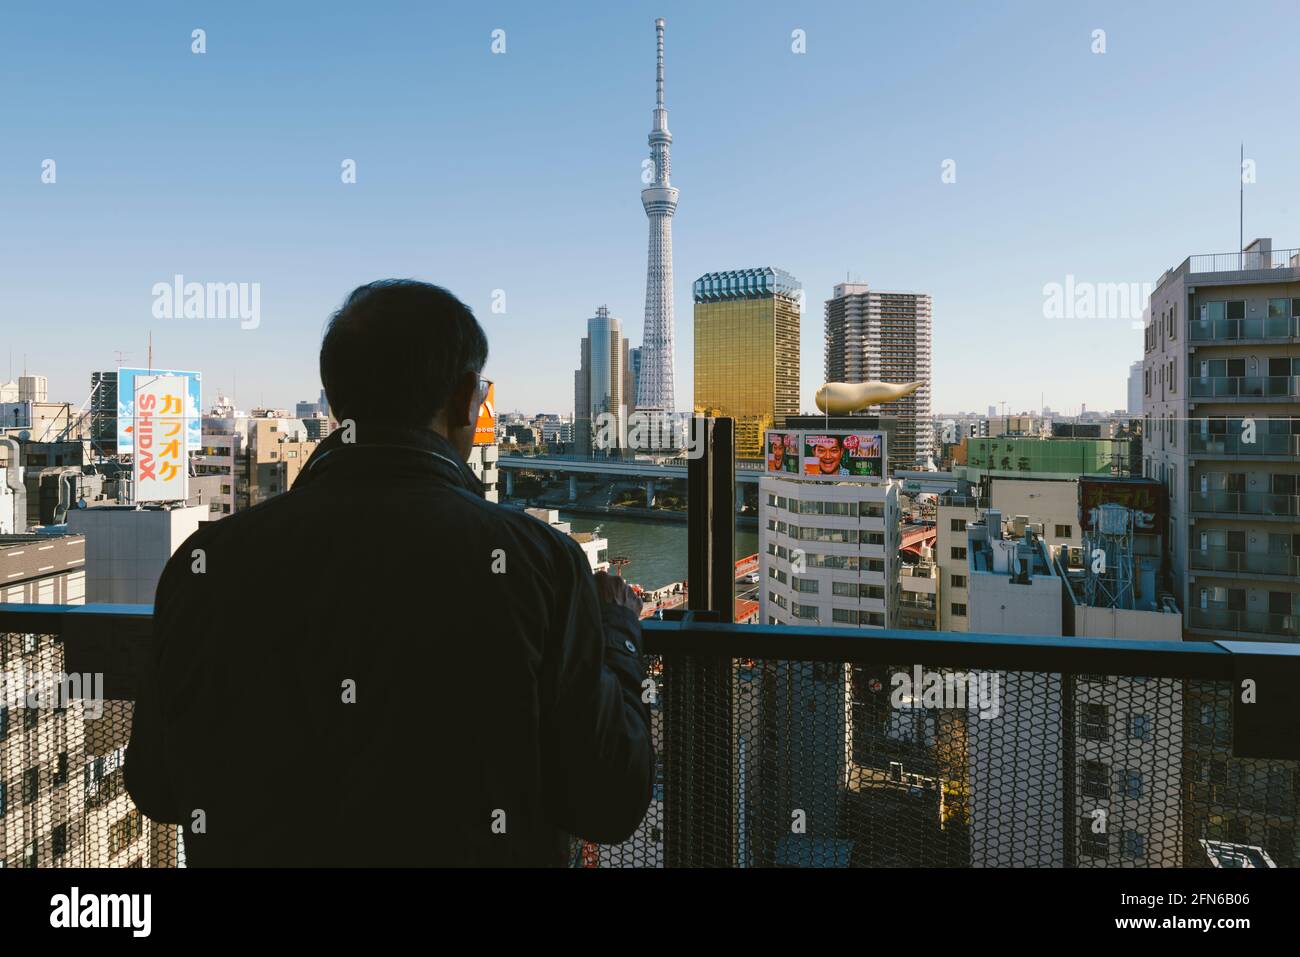 Tokyo, Japan - January 10, 2016: Japanese tourist enjoying the view from the top floor of the Asakusa Culture Tourist Information Center. Stock Photo